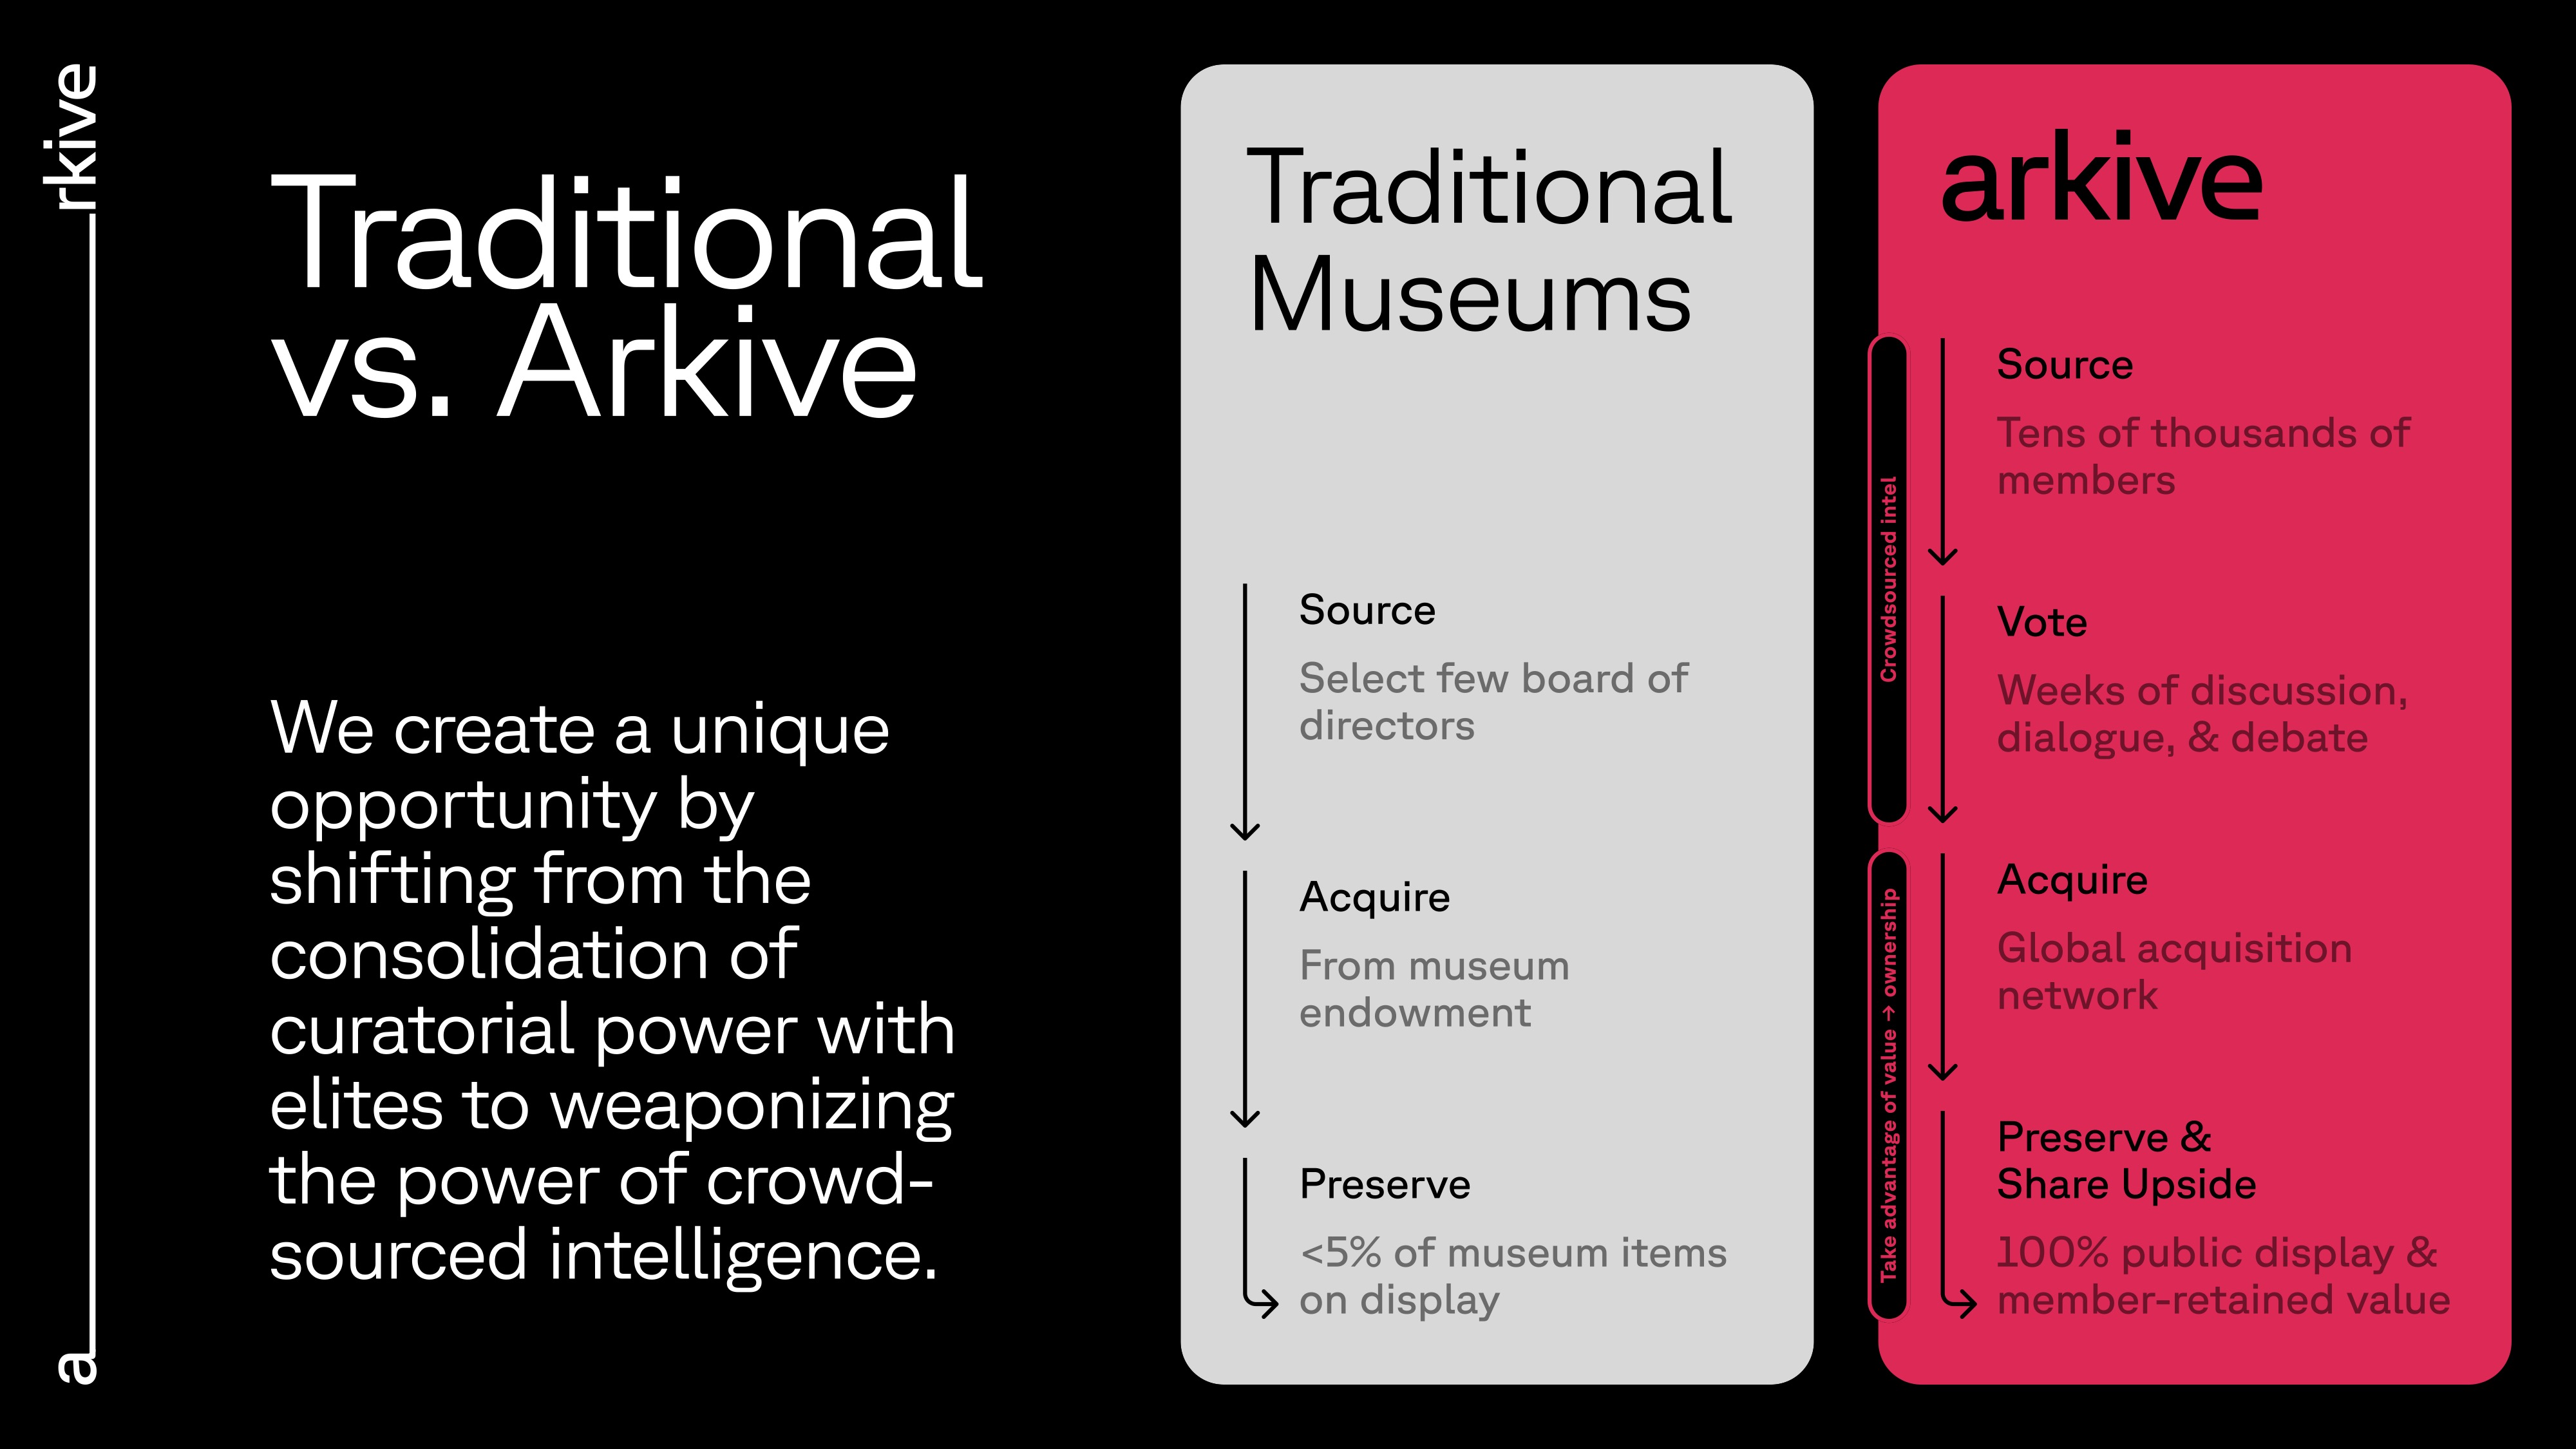 Slide 4 - We create a unique opportunity by shifting from the consolidation of curatorial power with elites to weaponizing the power of crowd-sourced intelligence.